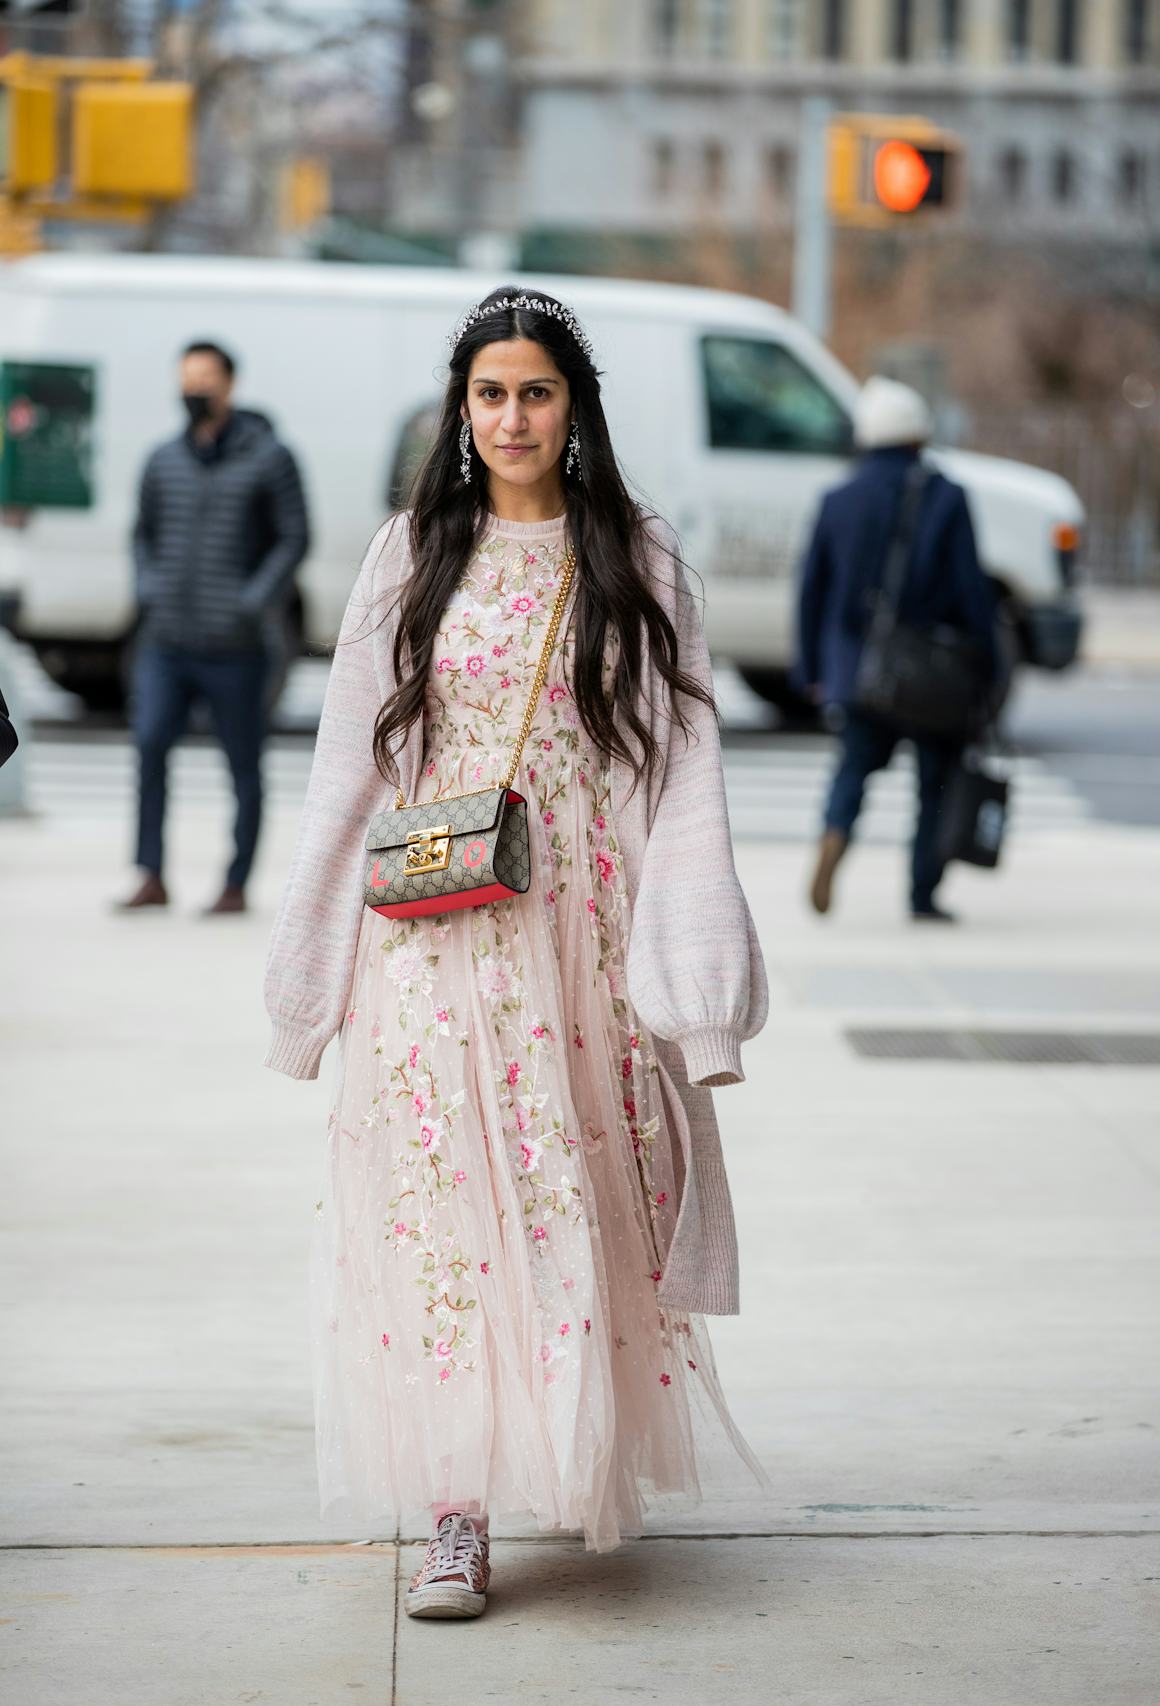 How to Wear a Dress in the Winter and Early Spring